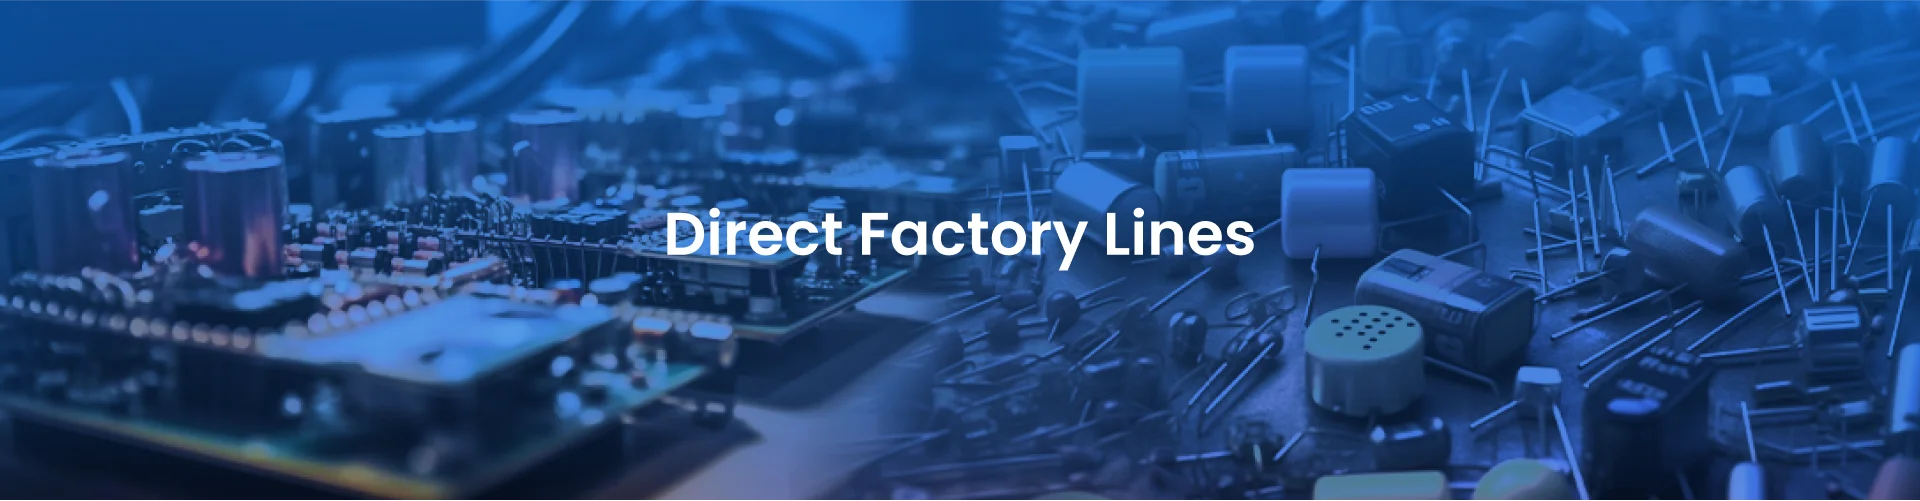 Direct Factory Lines